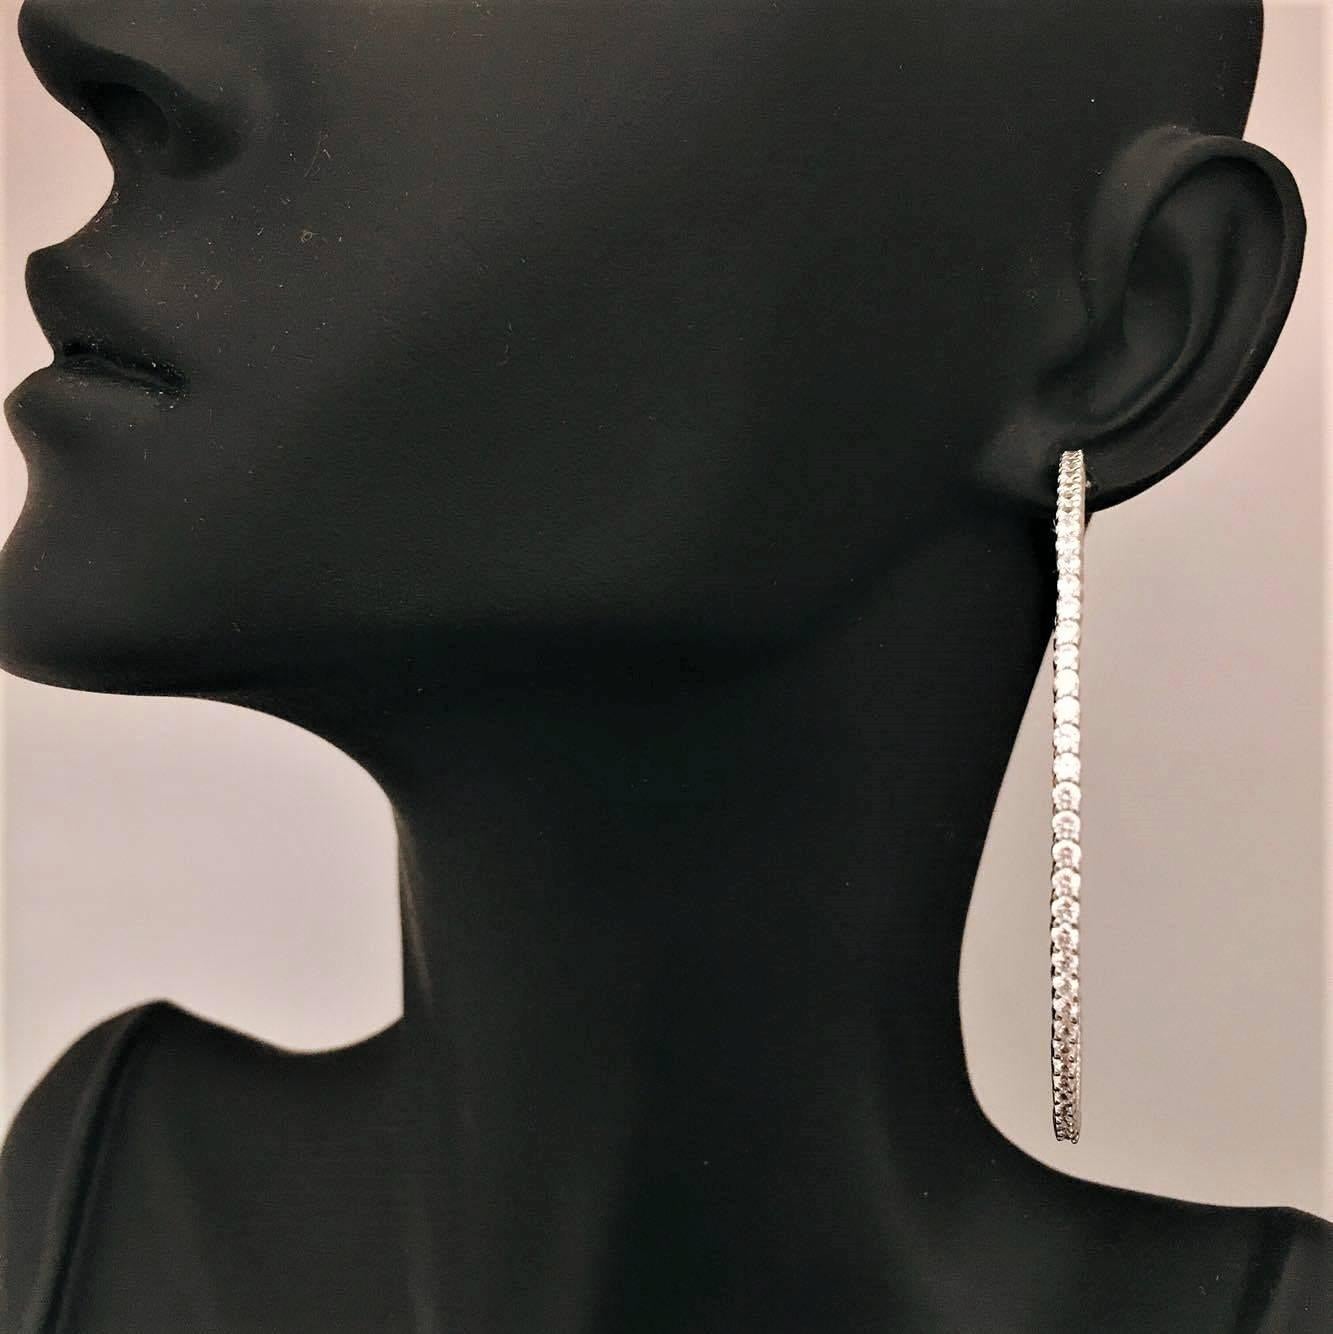 Our one of a kind push locking mechanism ensures this hoop never falls off your ear! The measurement of these hoops is approximately 2.00 inch outside to outside diameter. The total diamond weight is 3.00 Carats. The diamonds are F color Vs2